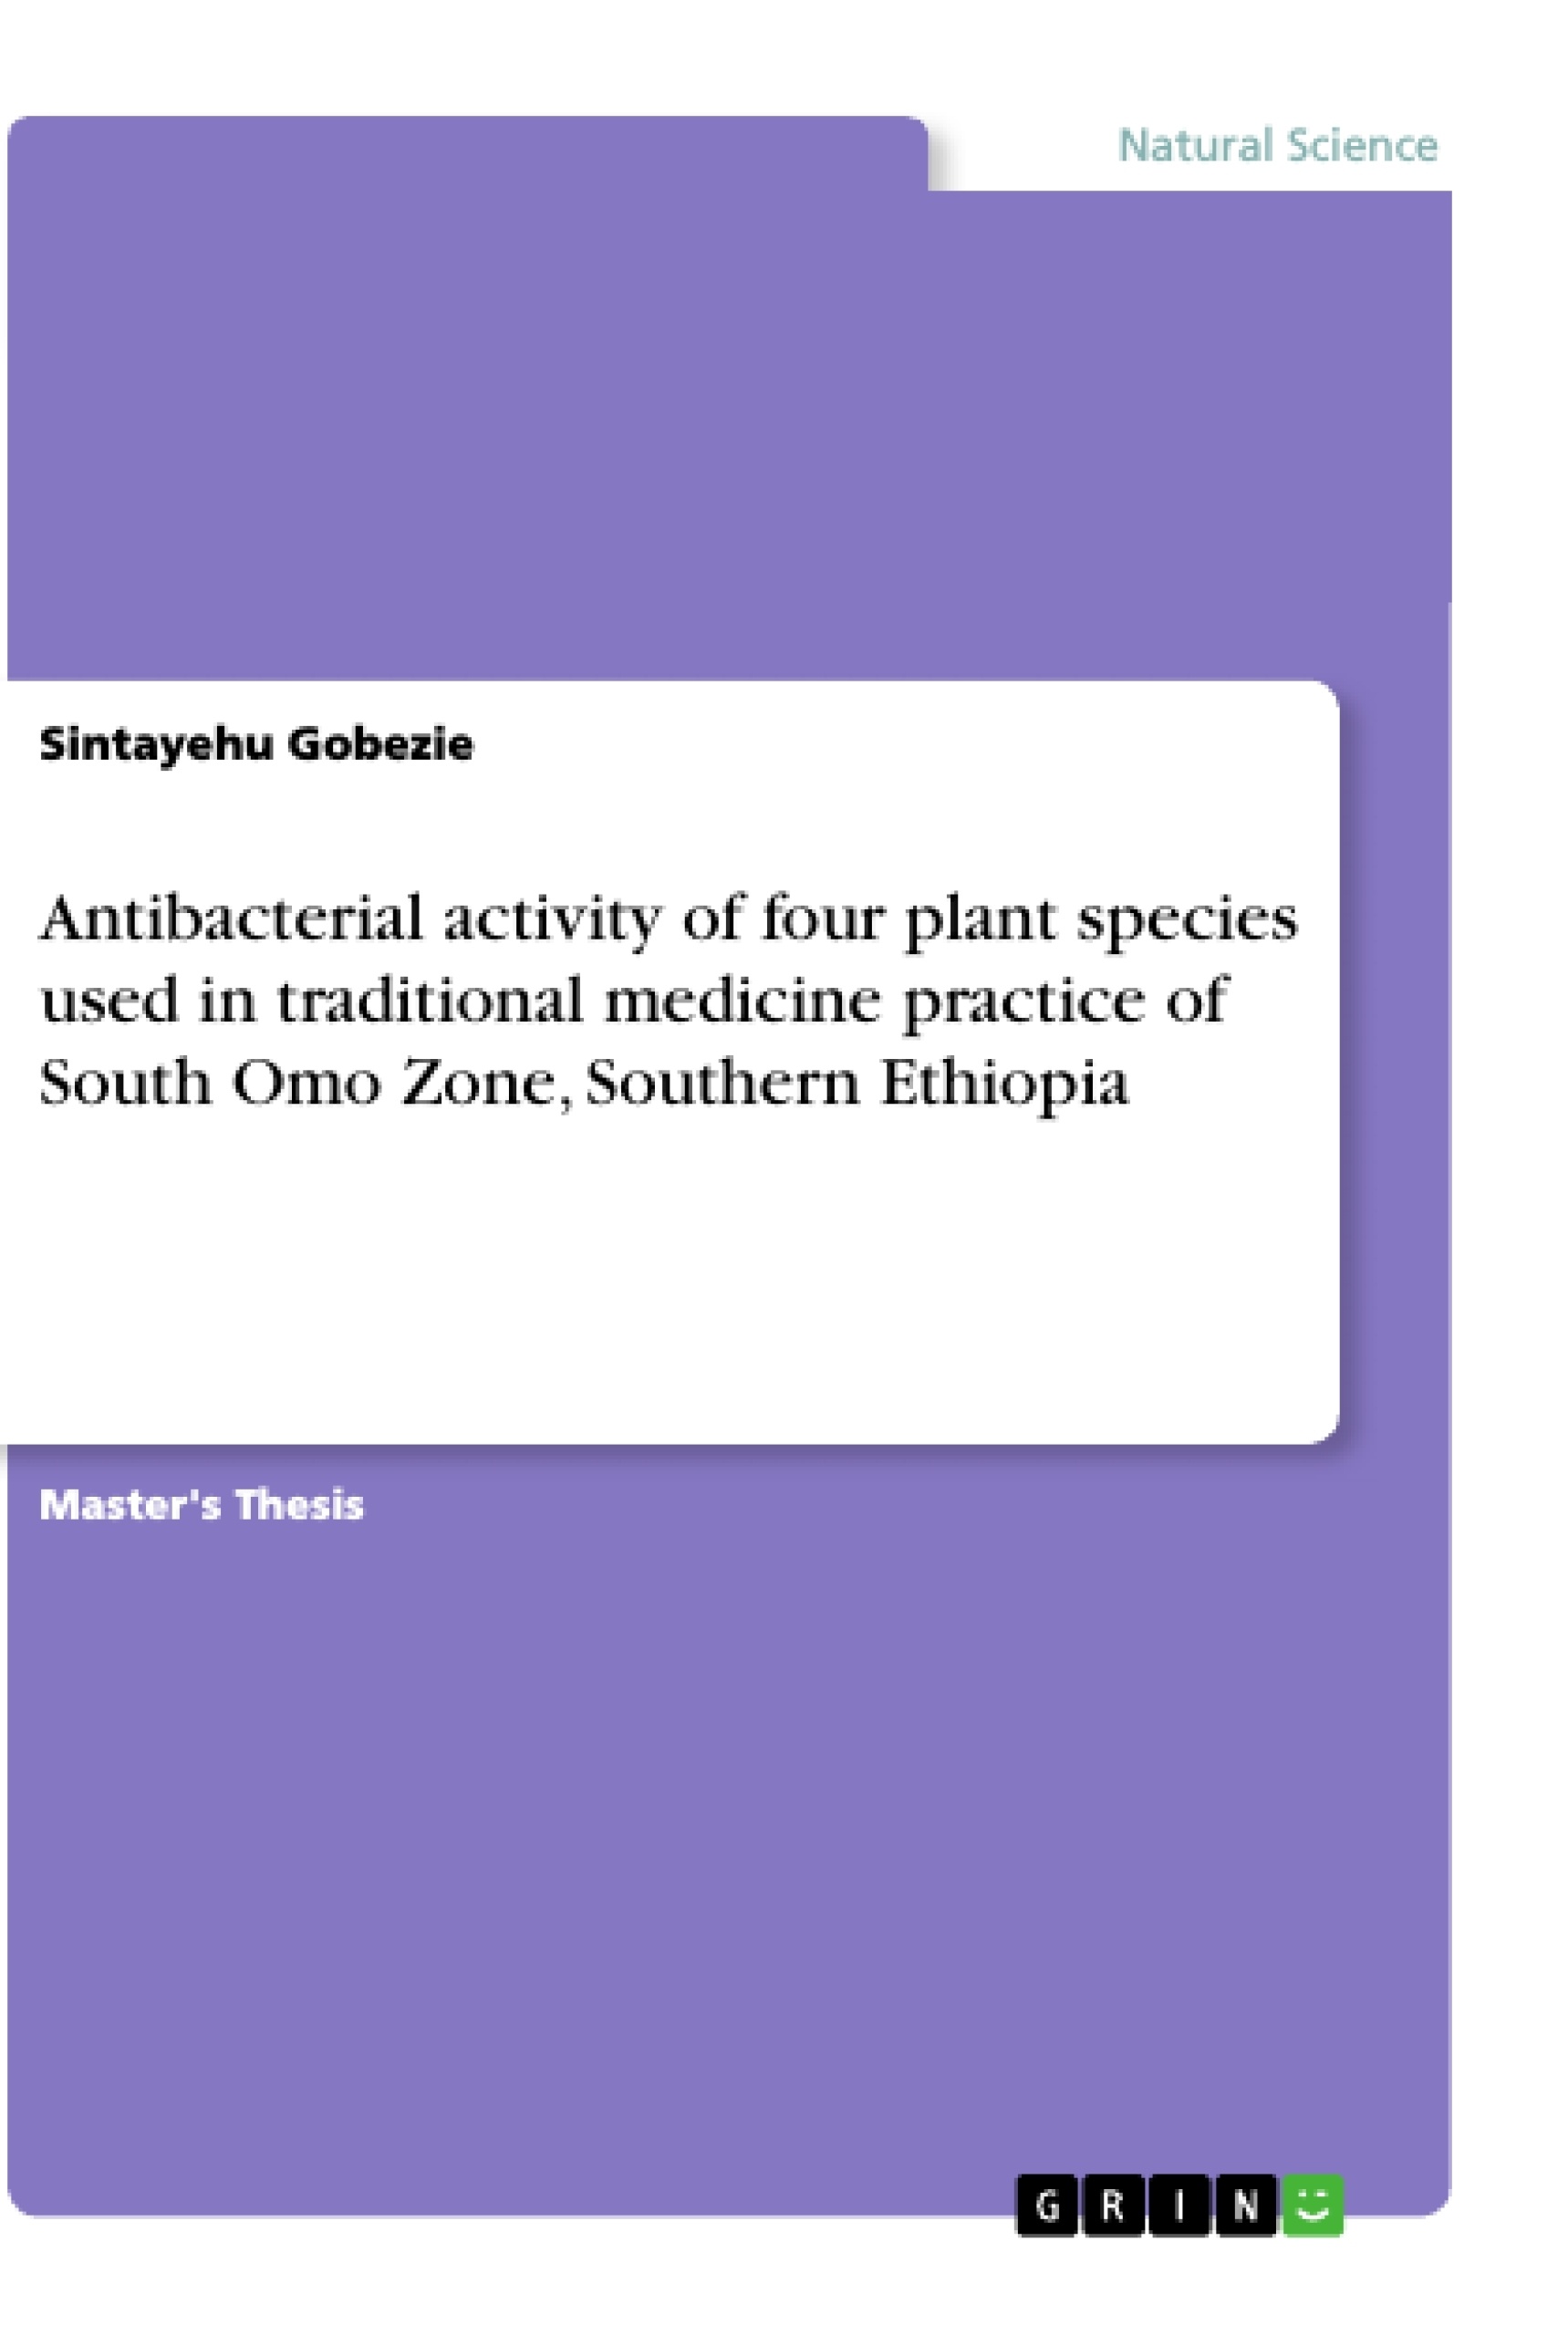 Title: Antibacterial activity of four plant species used in traditional medicine practice of South Omo Zone, Southern Ethiopia